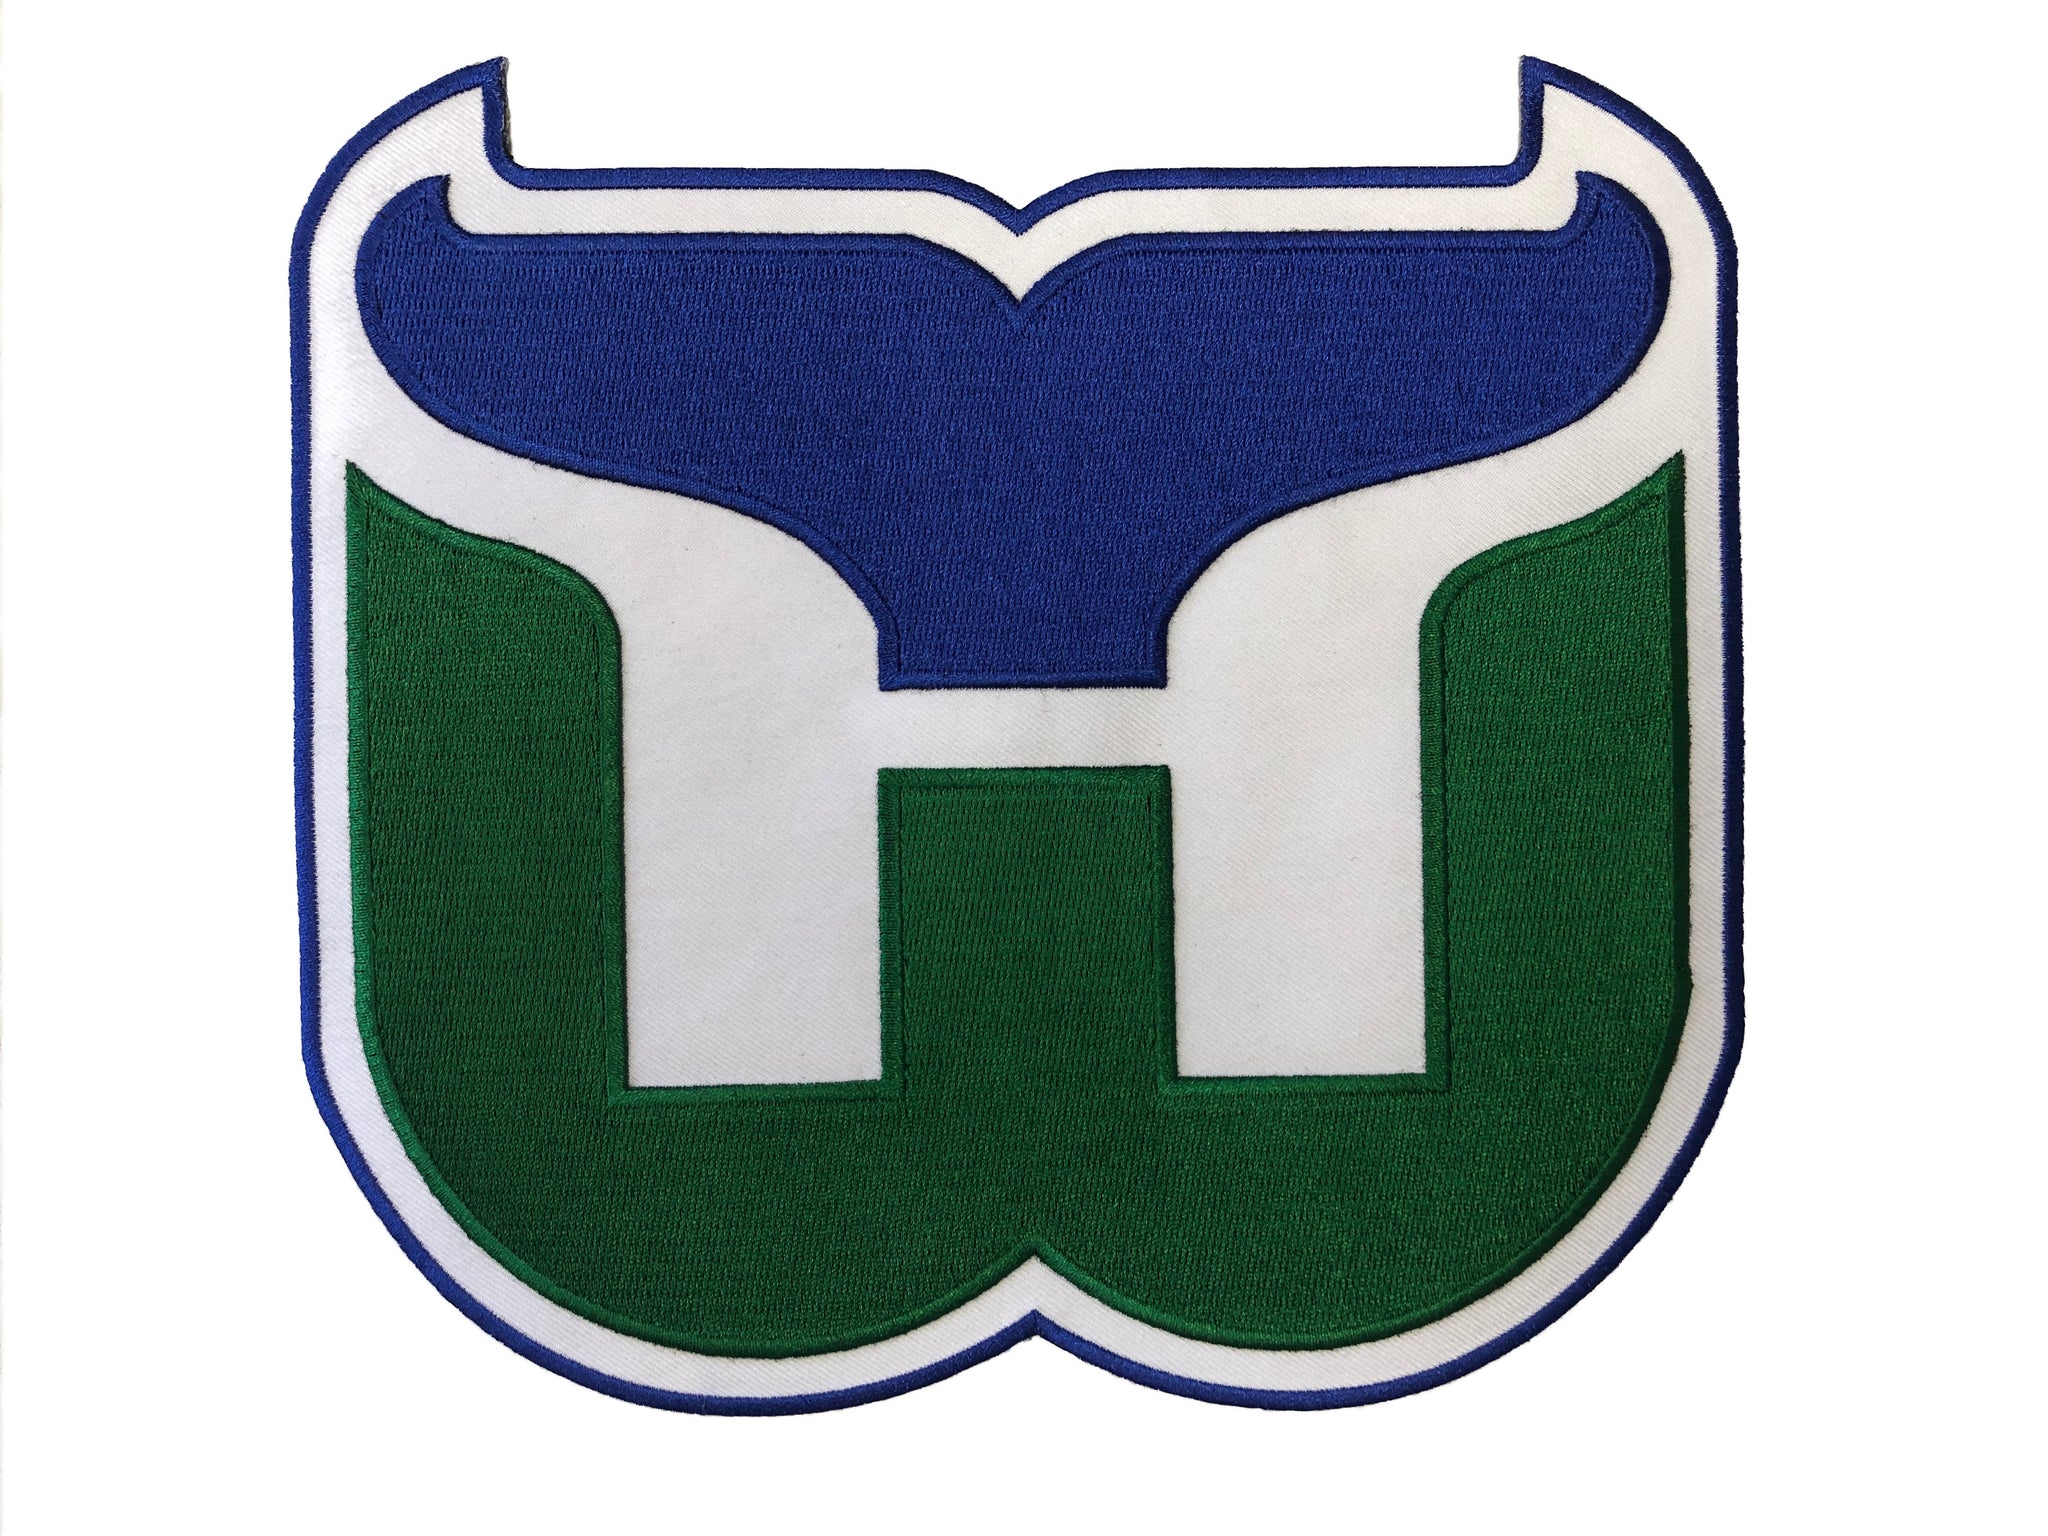 Personalized name and number NHL Reverse Retro jerseys Hartford Whalers –  Ahabear